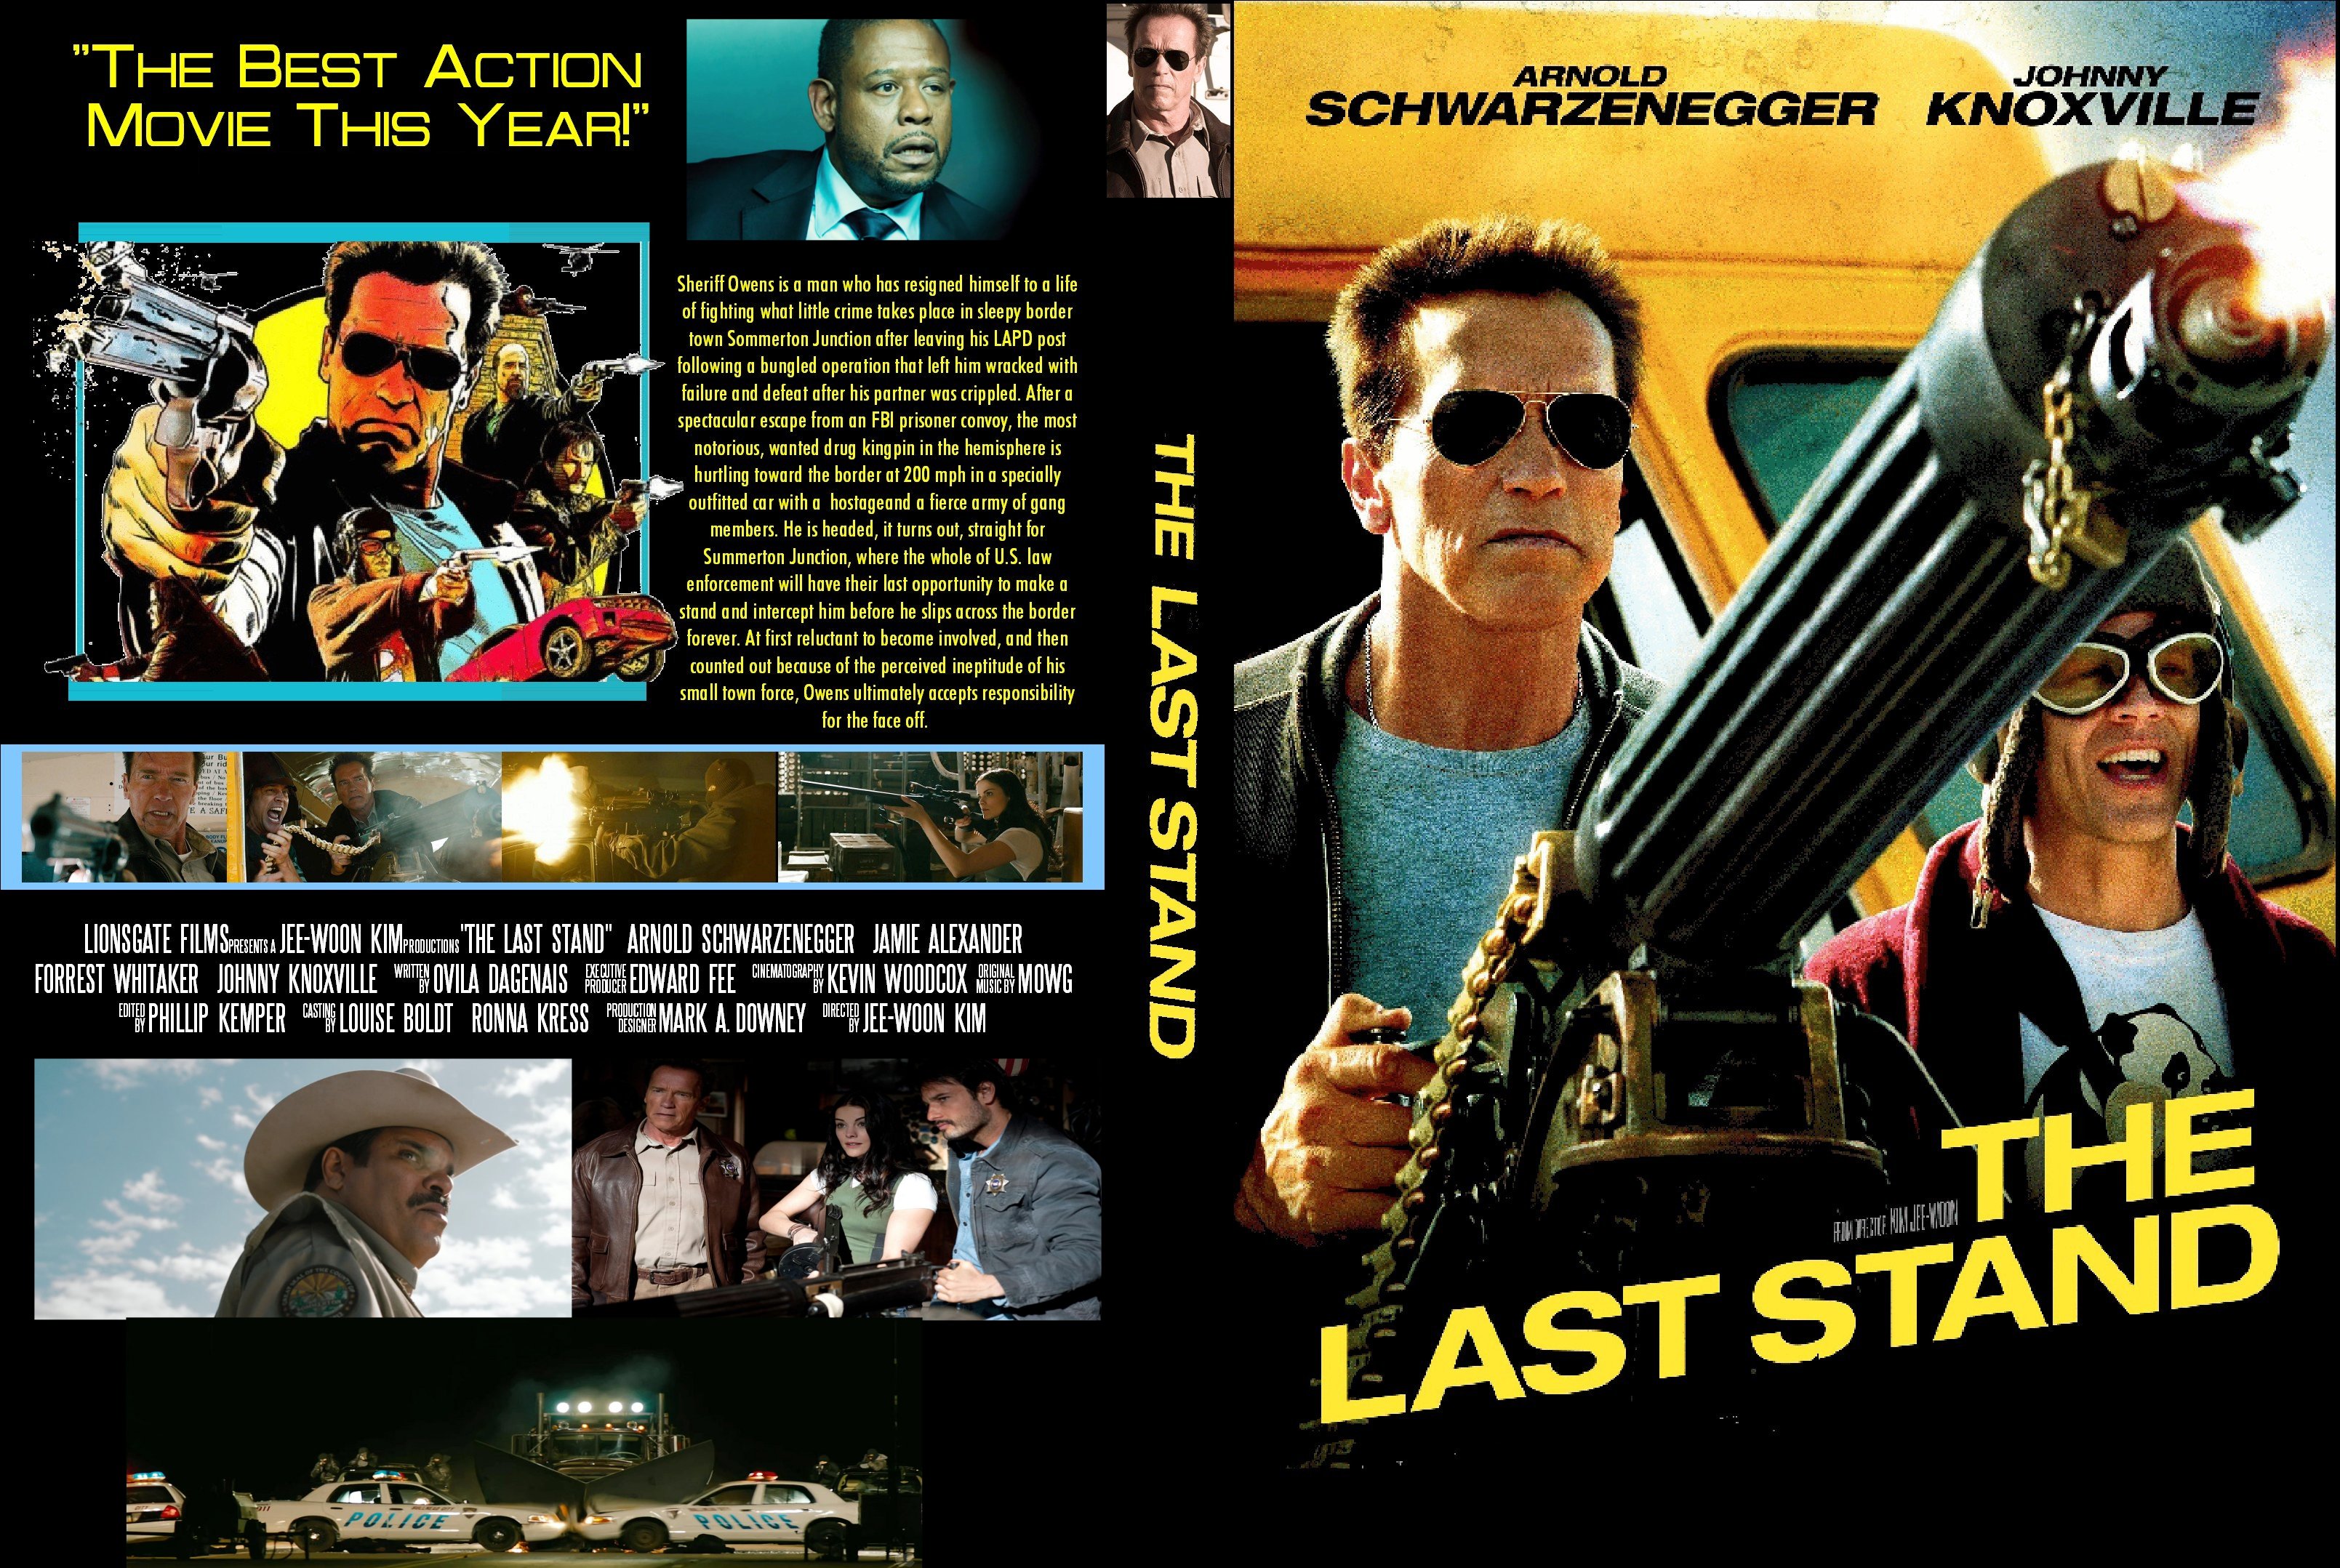 Item last stand. The last Stand 2013. The last Stand Cover 2013. The last Stand 2013 poster.